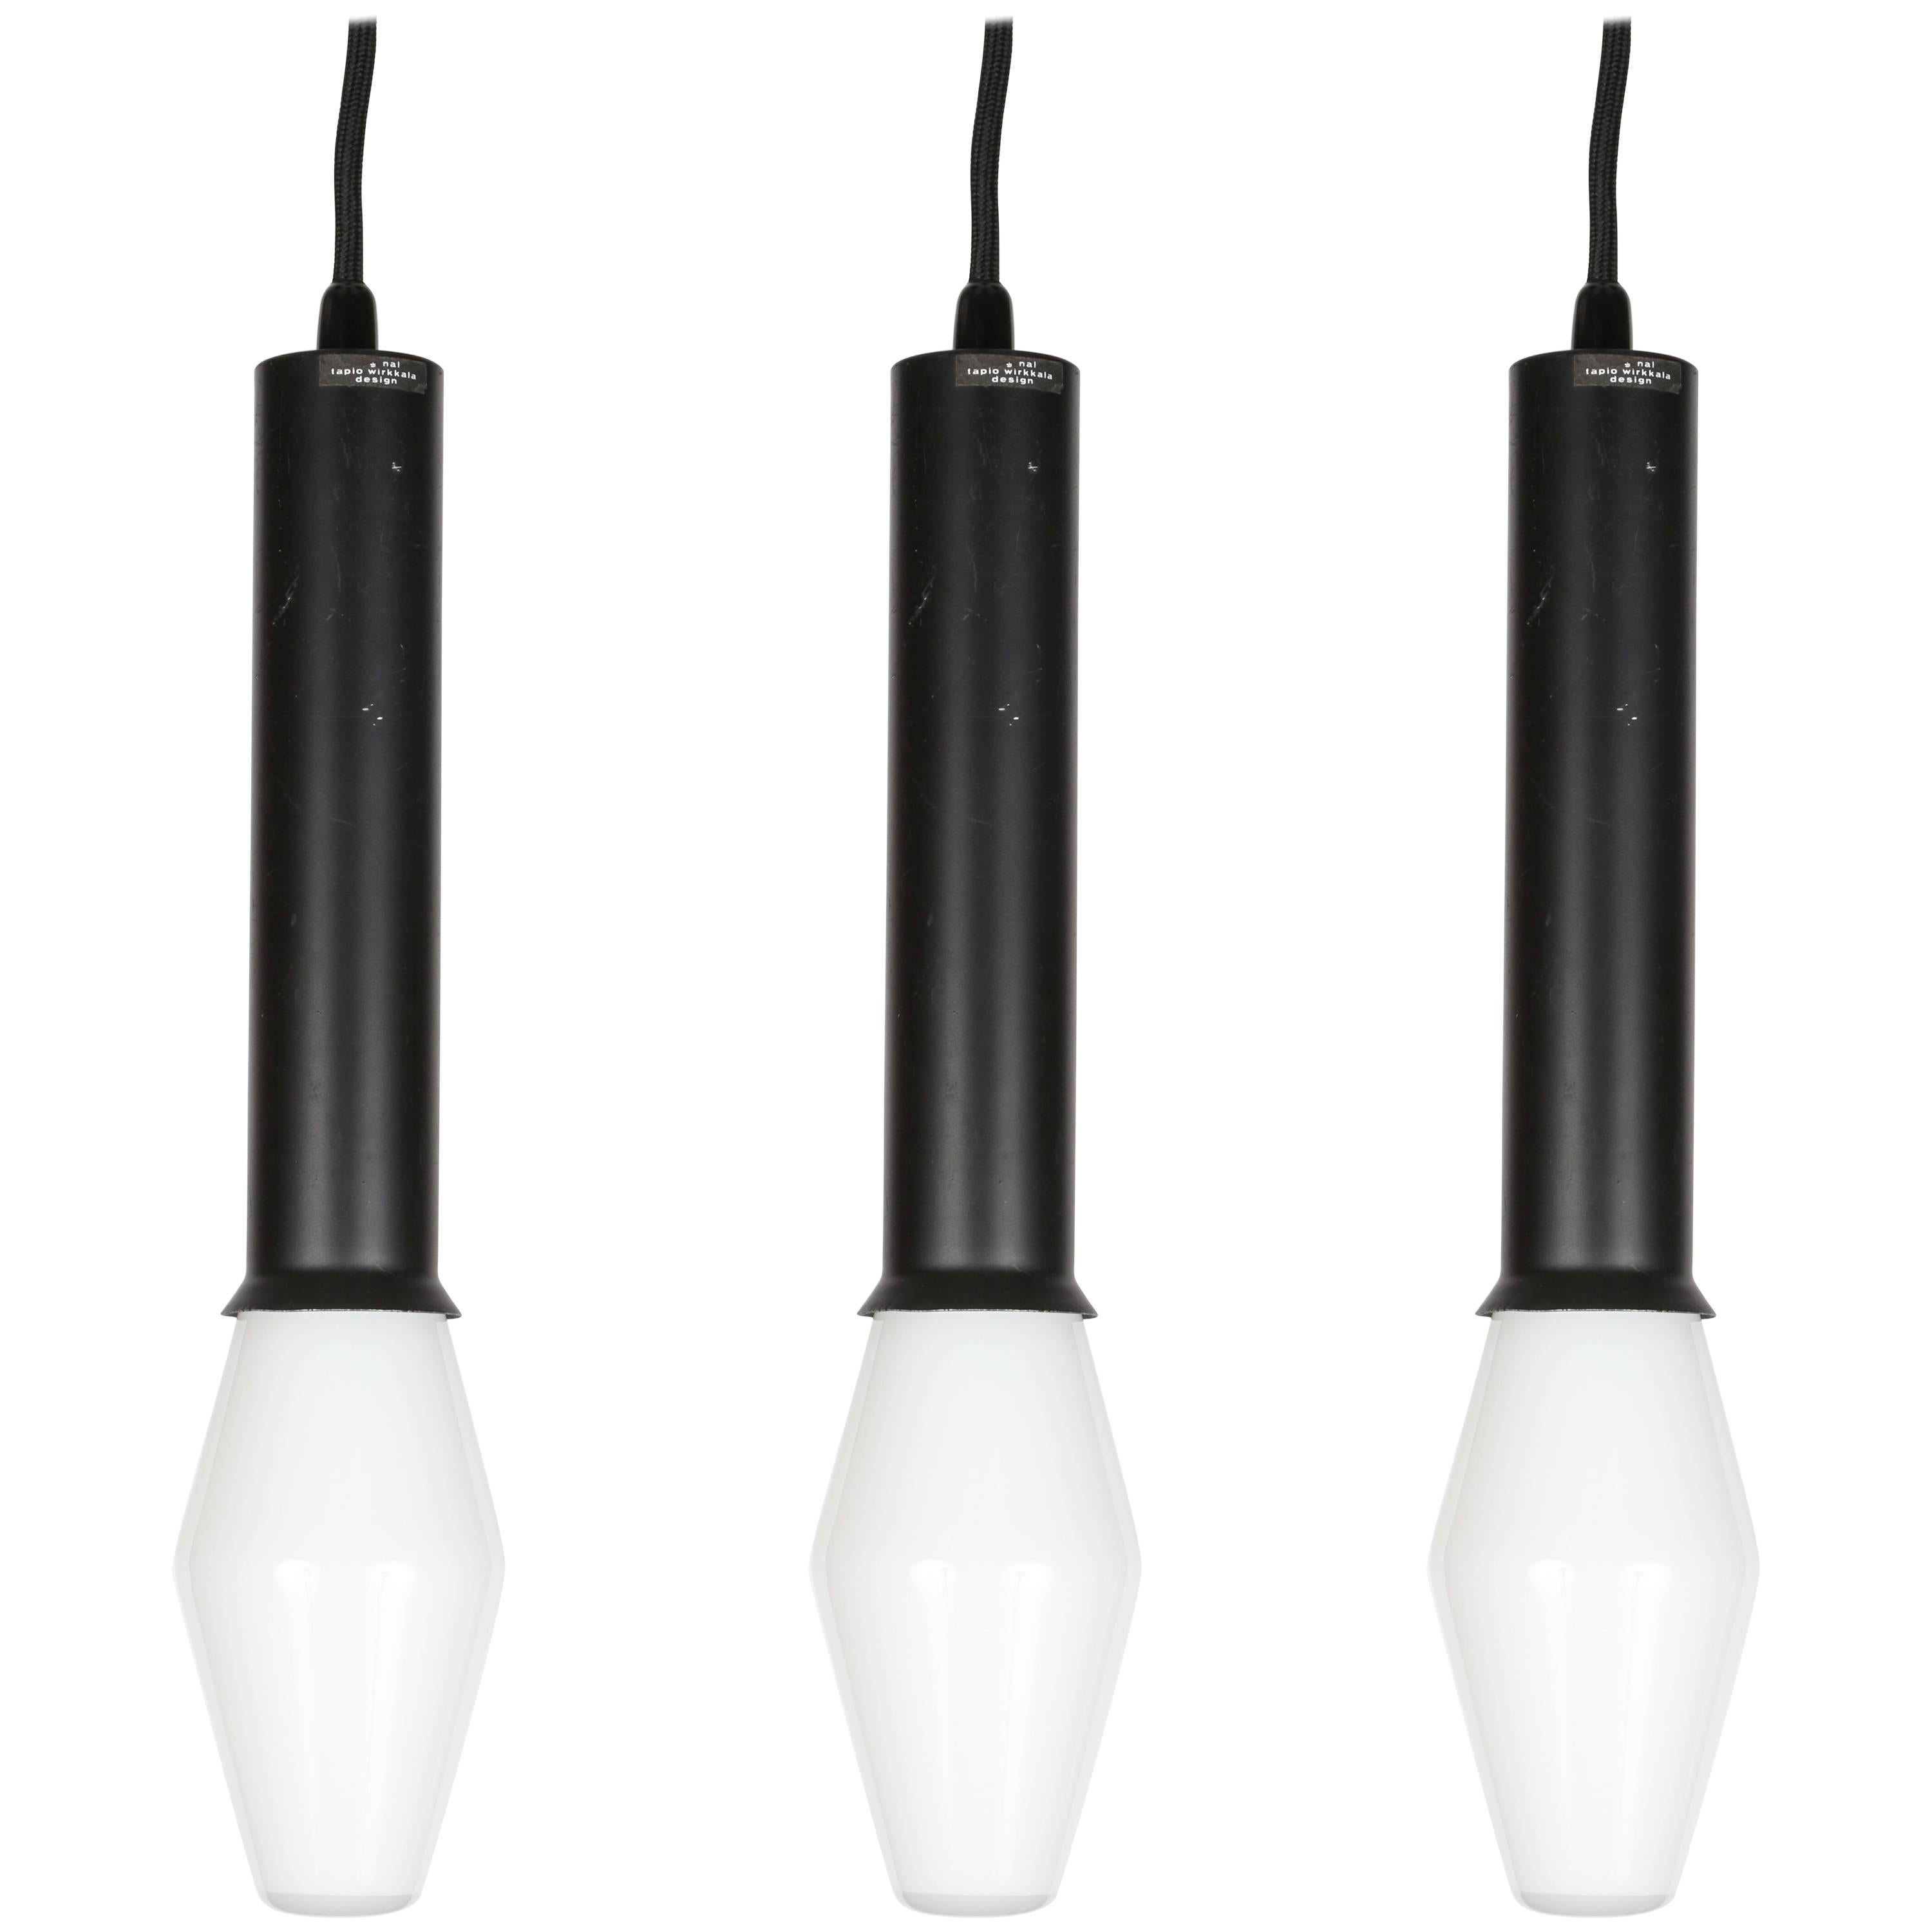 1960s Tapio Wirkkala pendants for Idman, executed in black painted metal and rare blown-glass architectural bulbs. Retains original manufacturer's label and rare original boxes for all three vintage and fully functional bulbs.

Price is for the